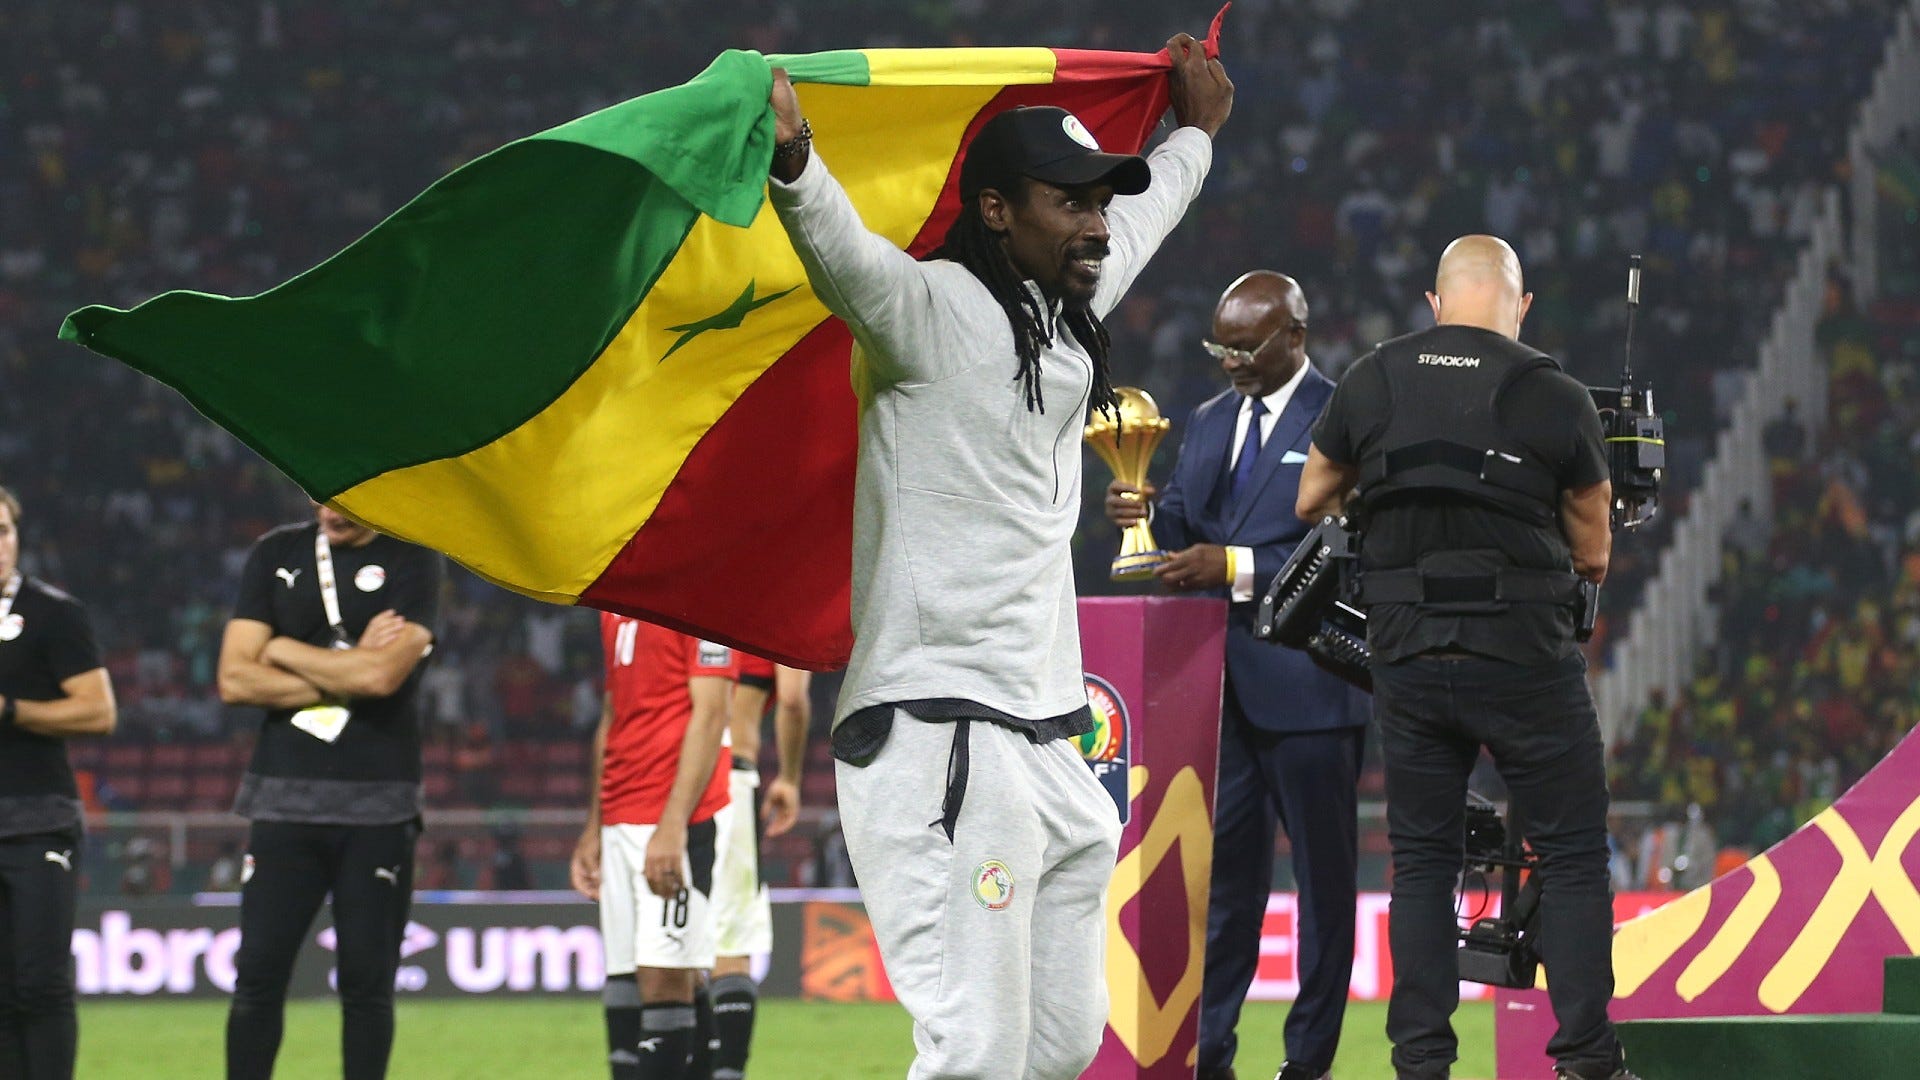 Senegal's Aliou Cisse, Keshi & local coaches to win Afcon since 2006